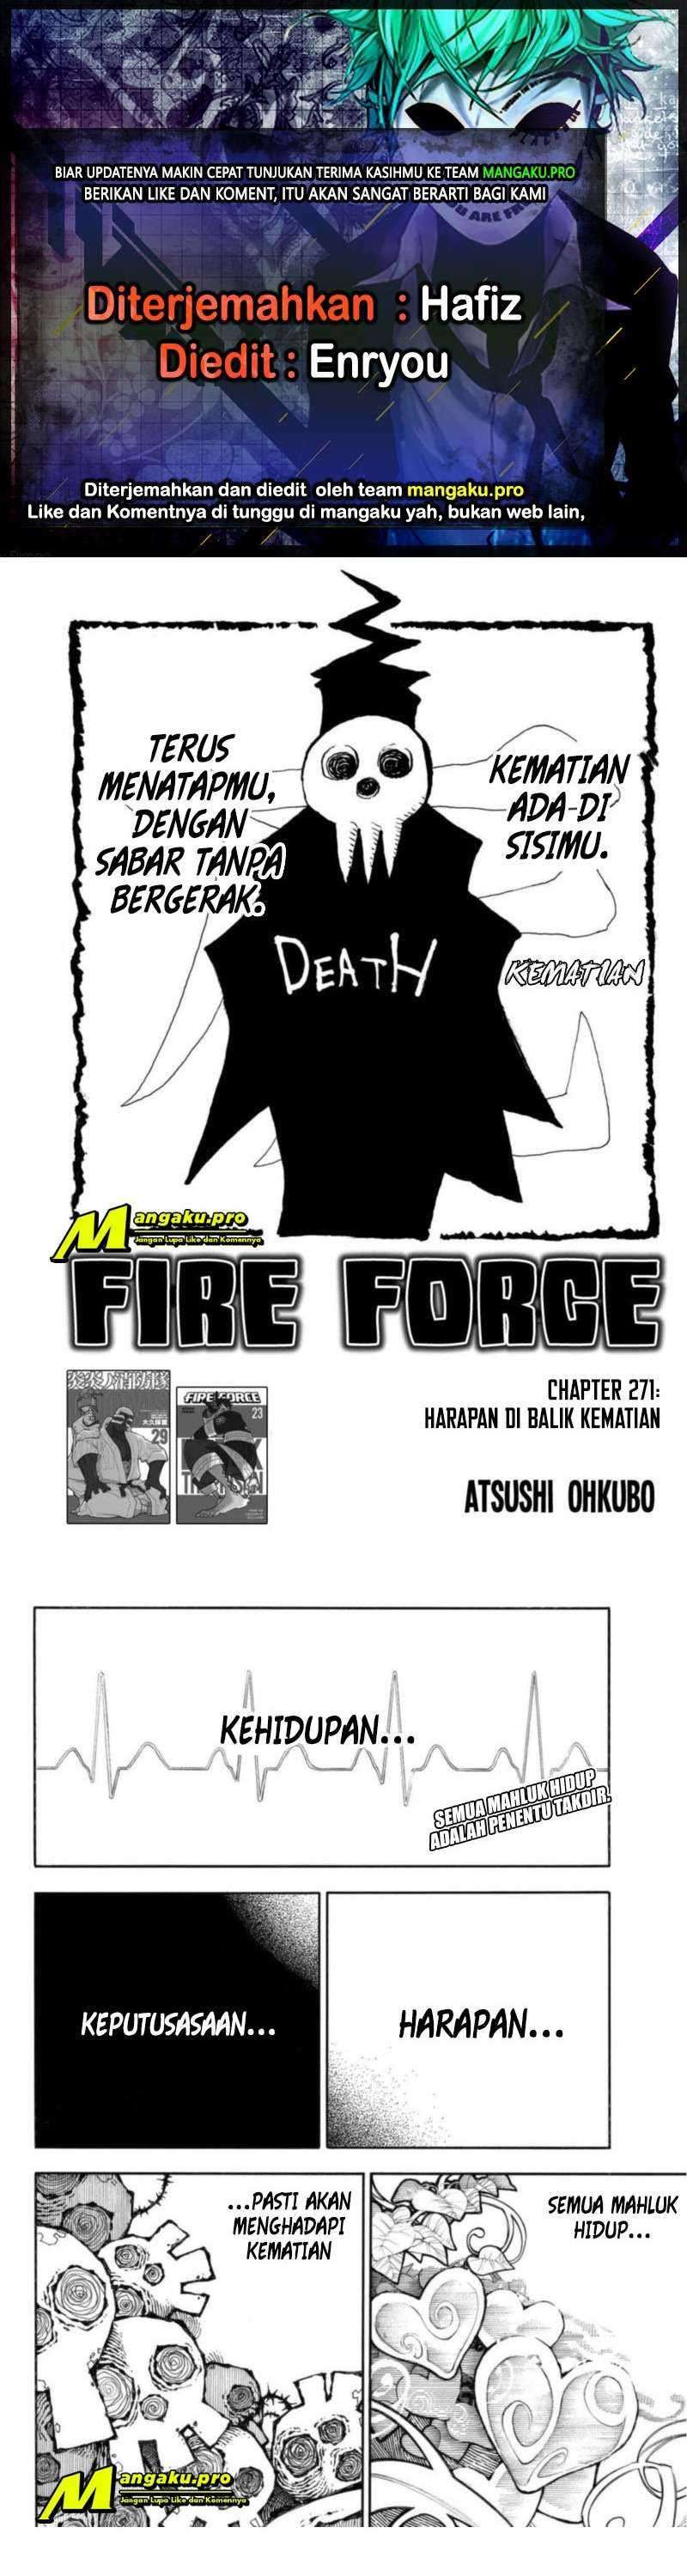 Fire Brigade of Flames Chapter 271